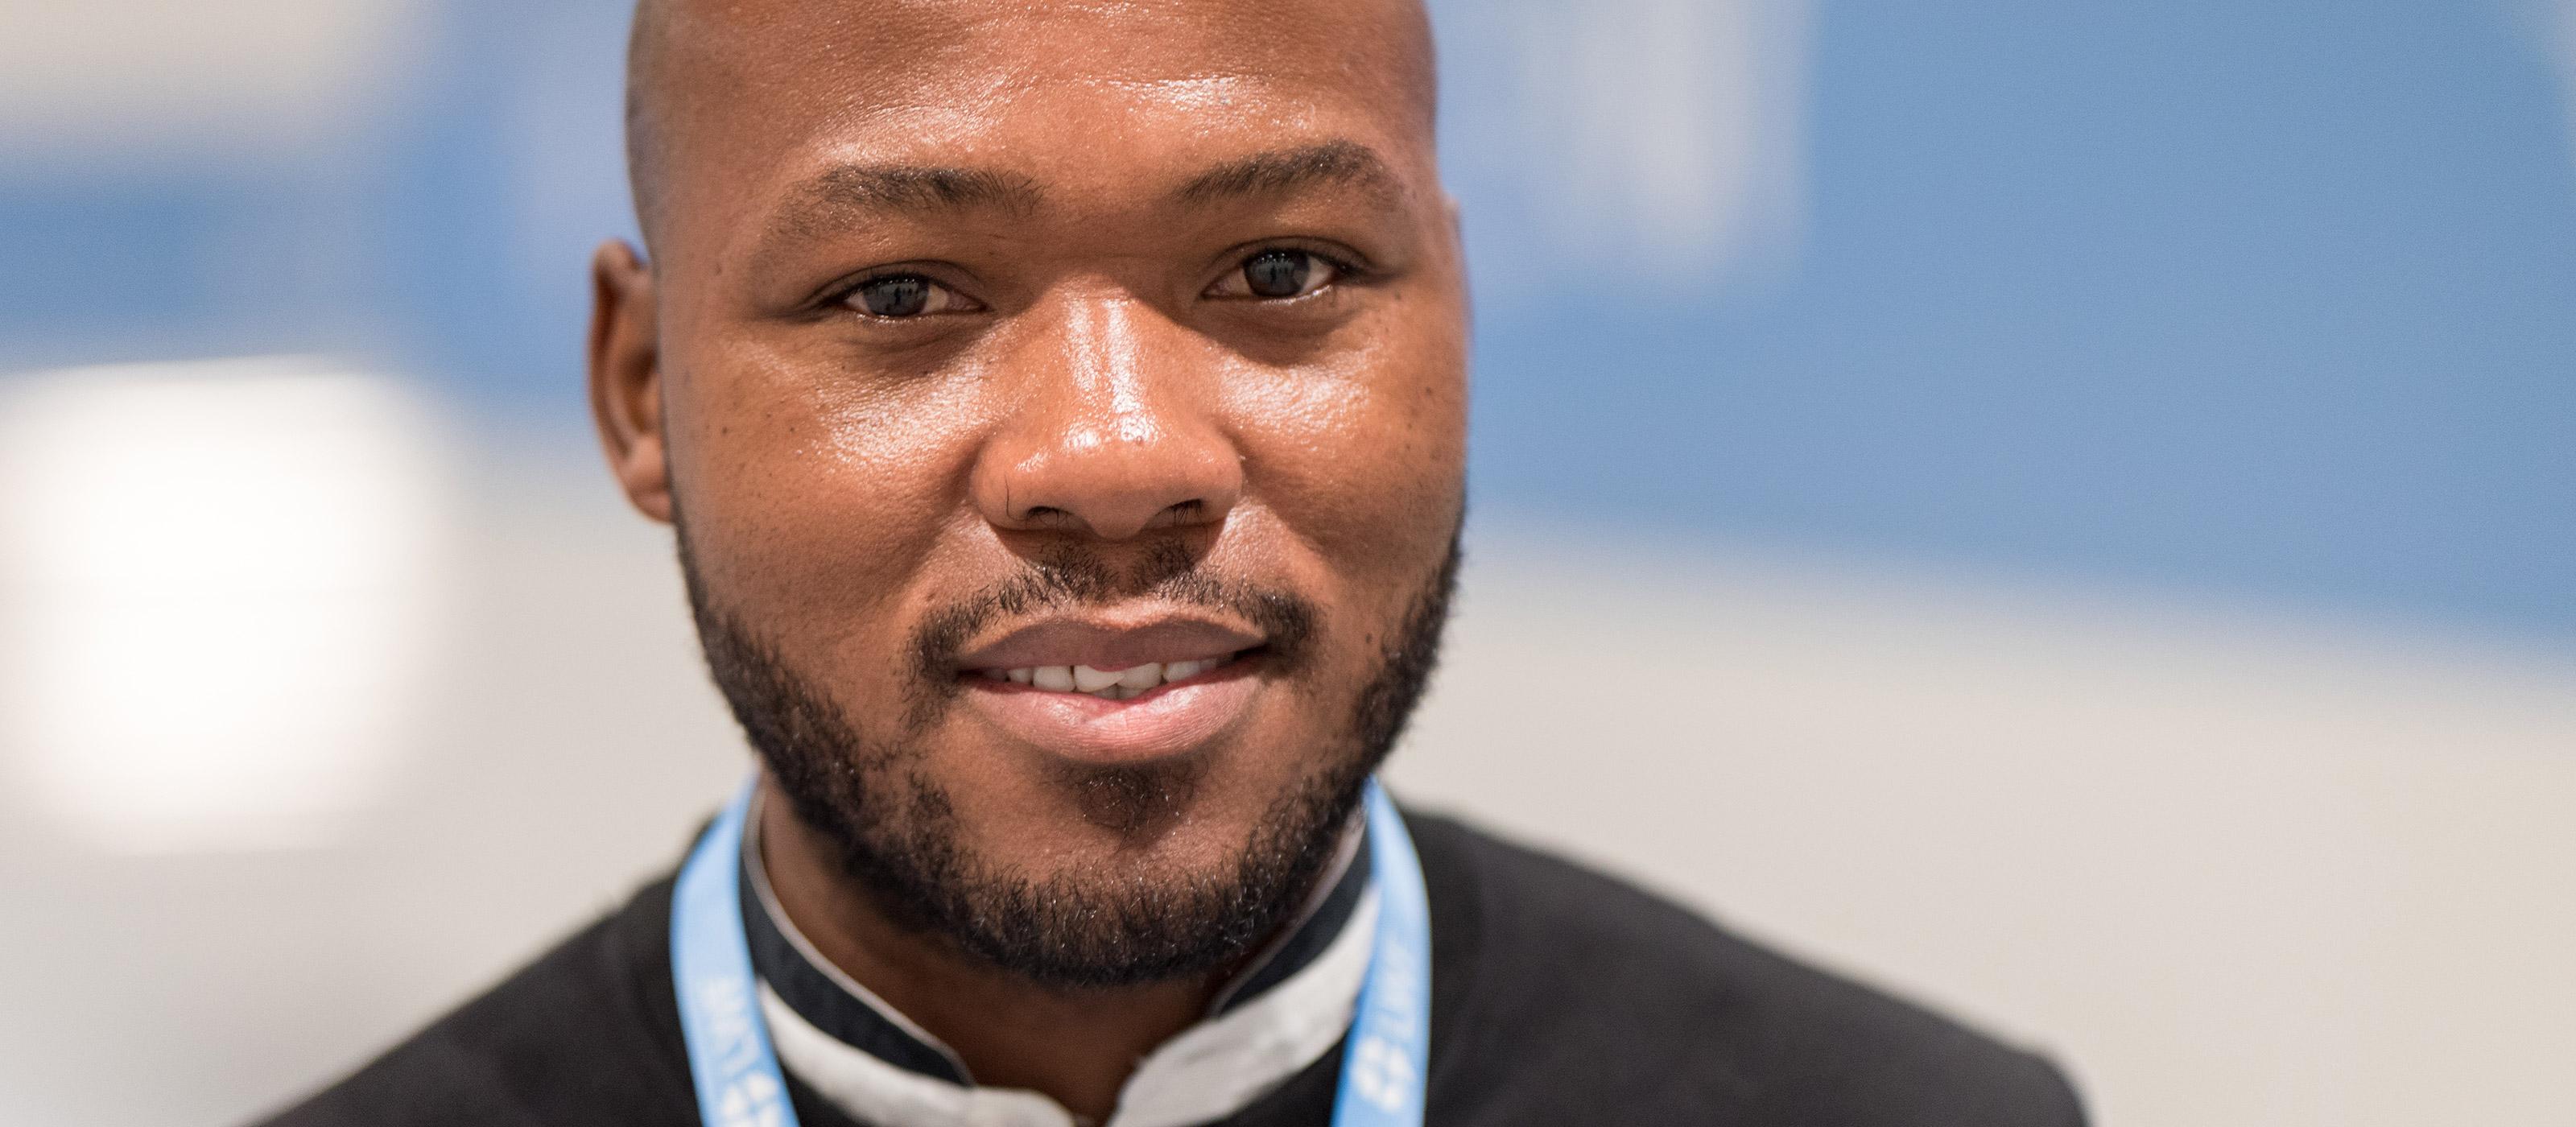 Khulekani Magwaza is a member of the LWF Council and youth delegate at the current UN climate conference COP26. Photo: LWF/Albin Hillert 